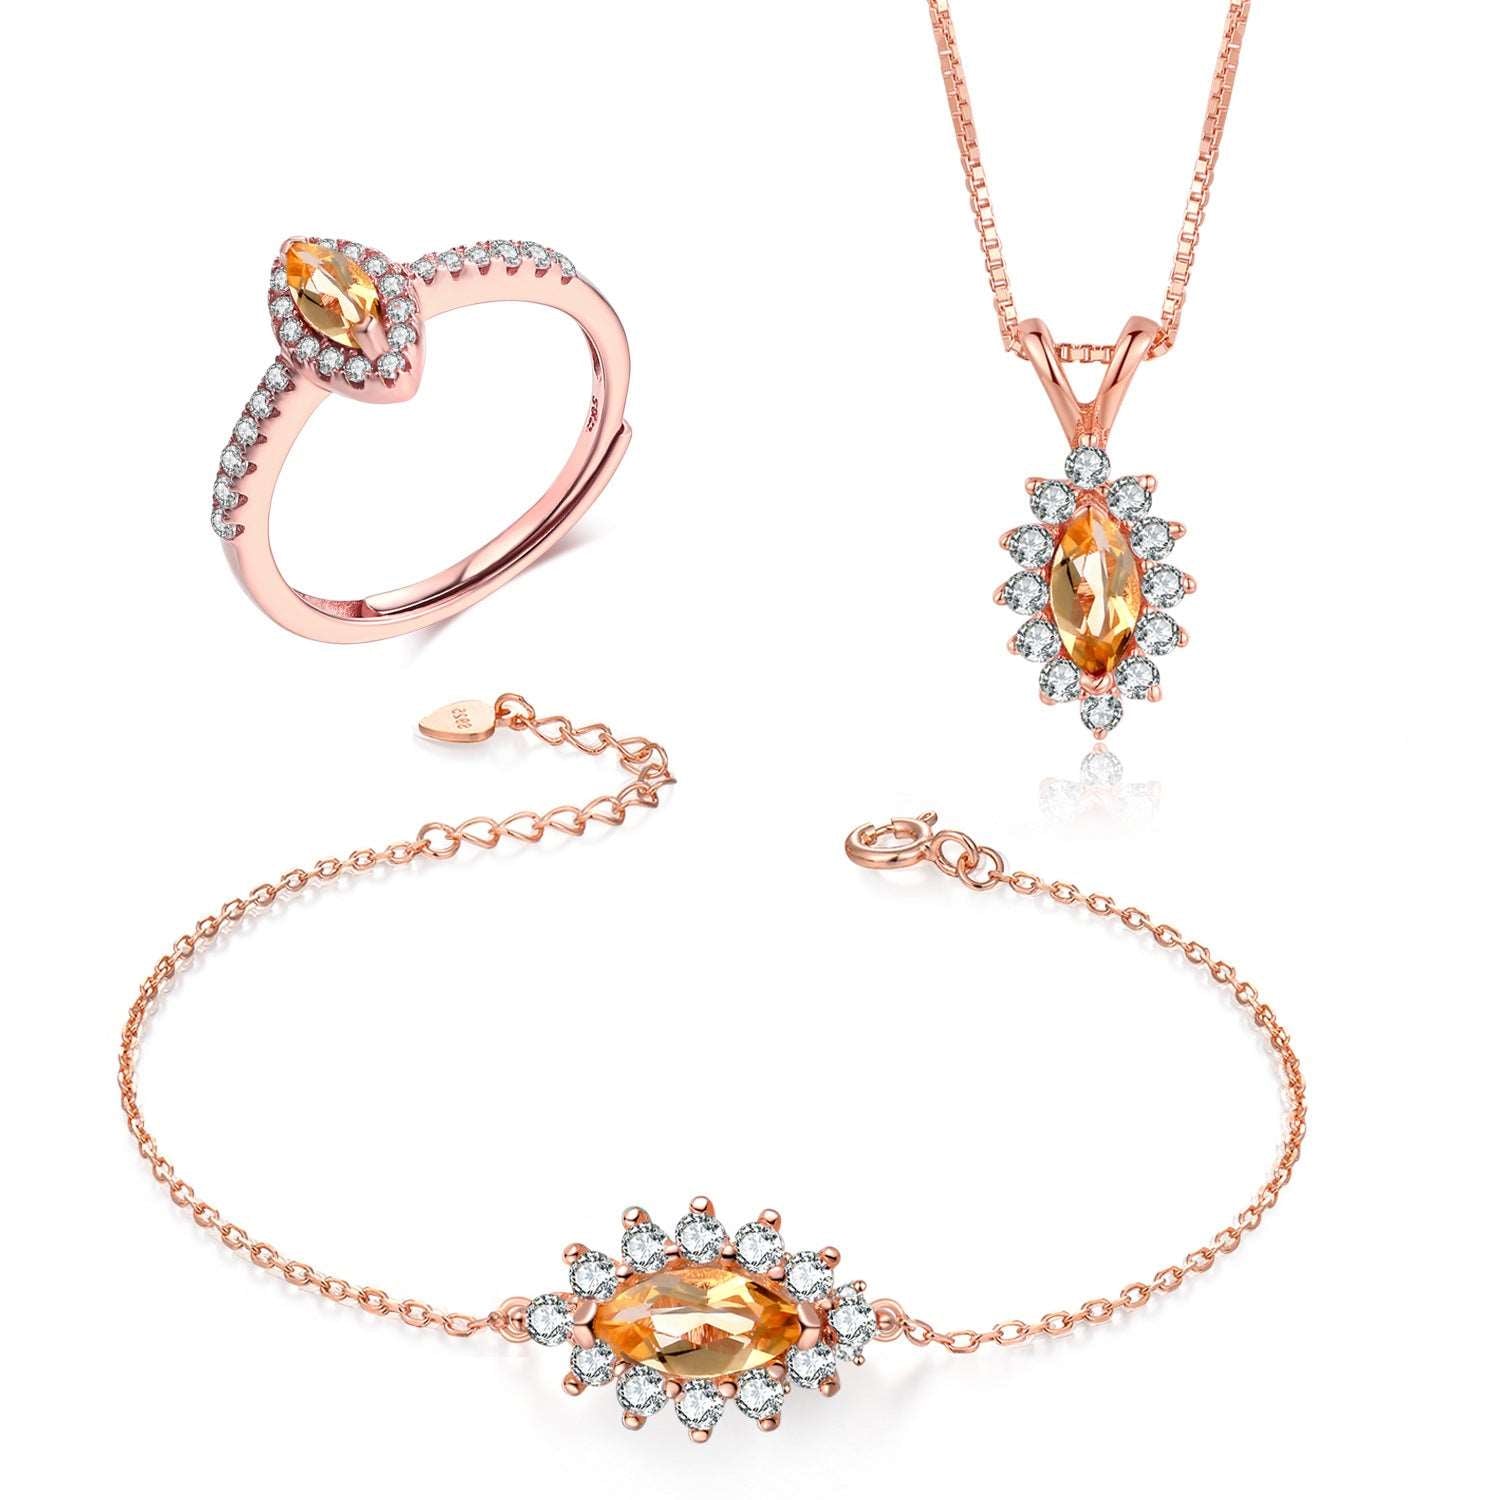 Natural citrine and zircon rose gold jewelry set